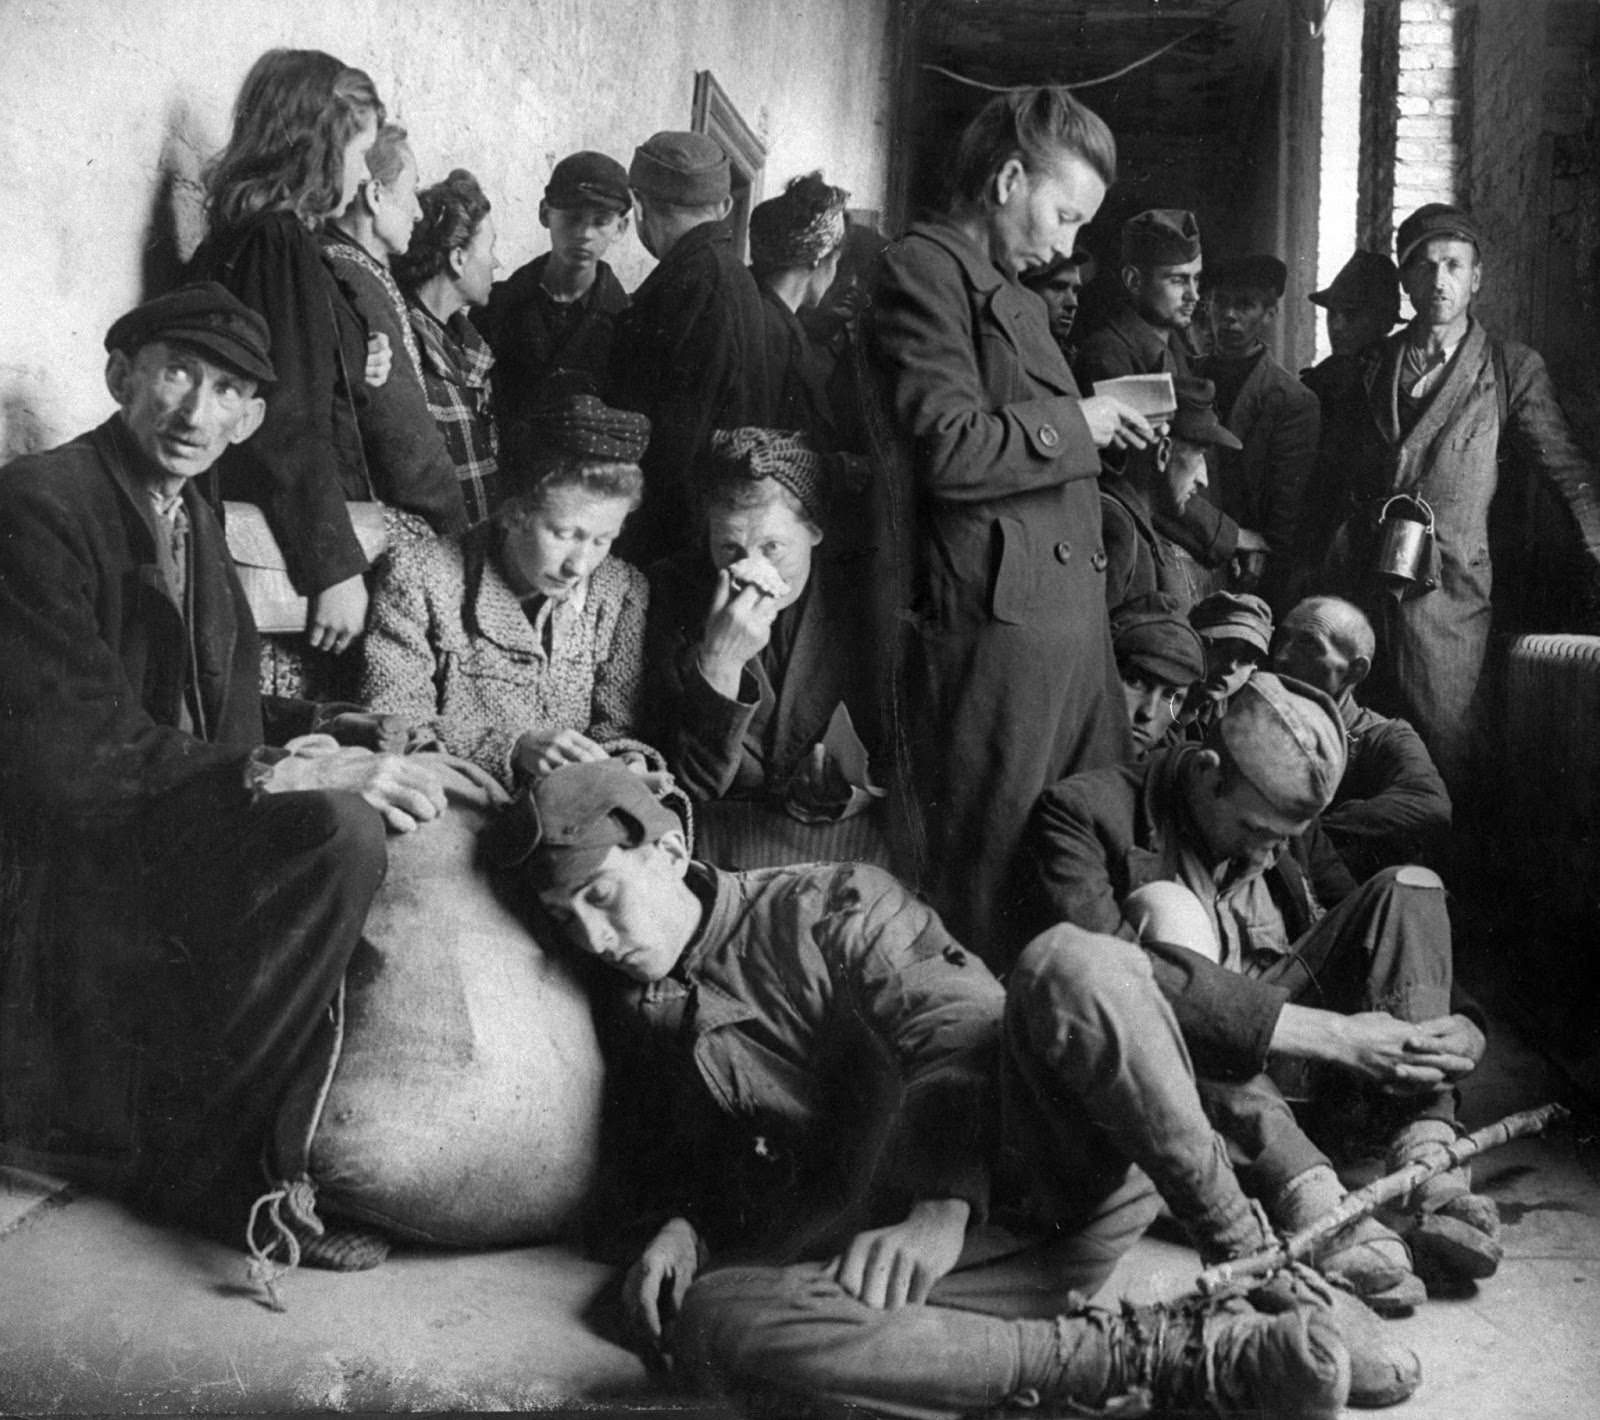 Exhausted, homeless German refugees huddled in a city municipal building seeking shelter. 1945.